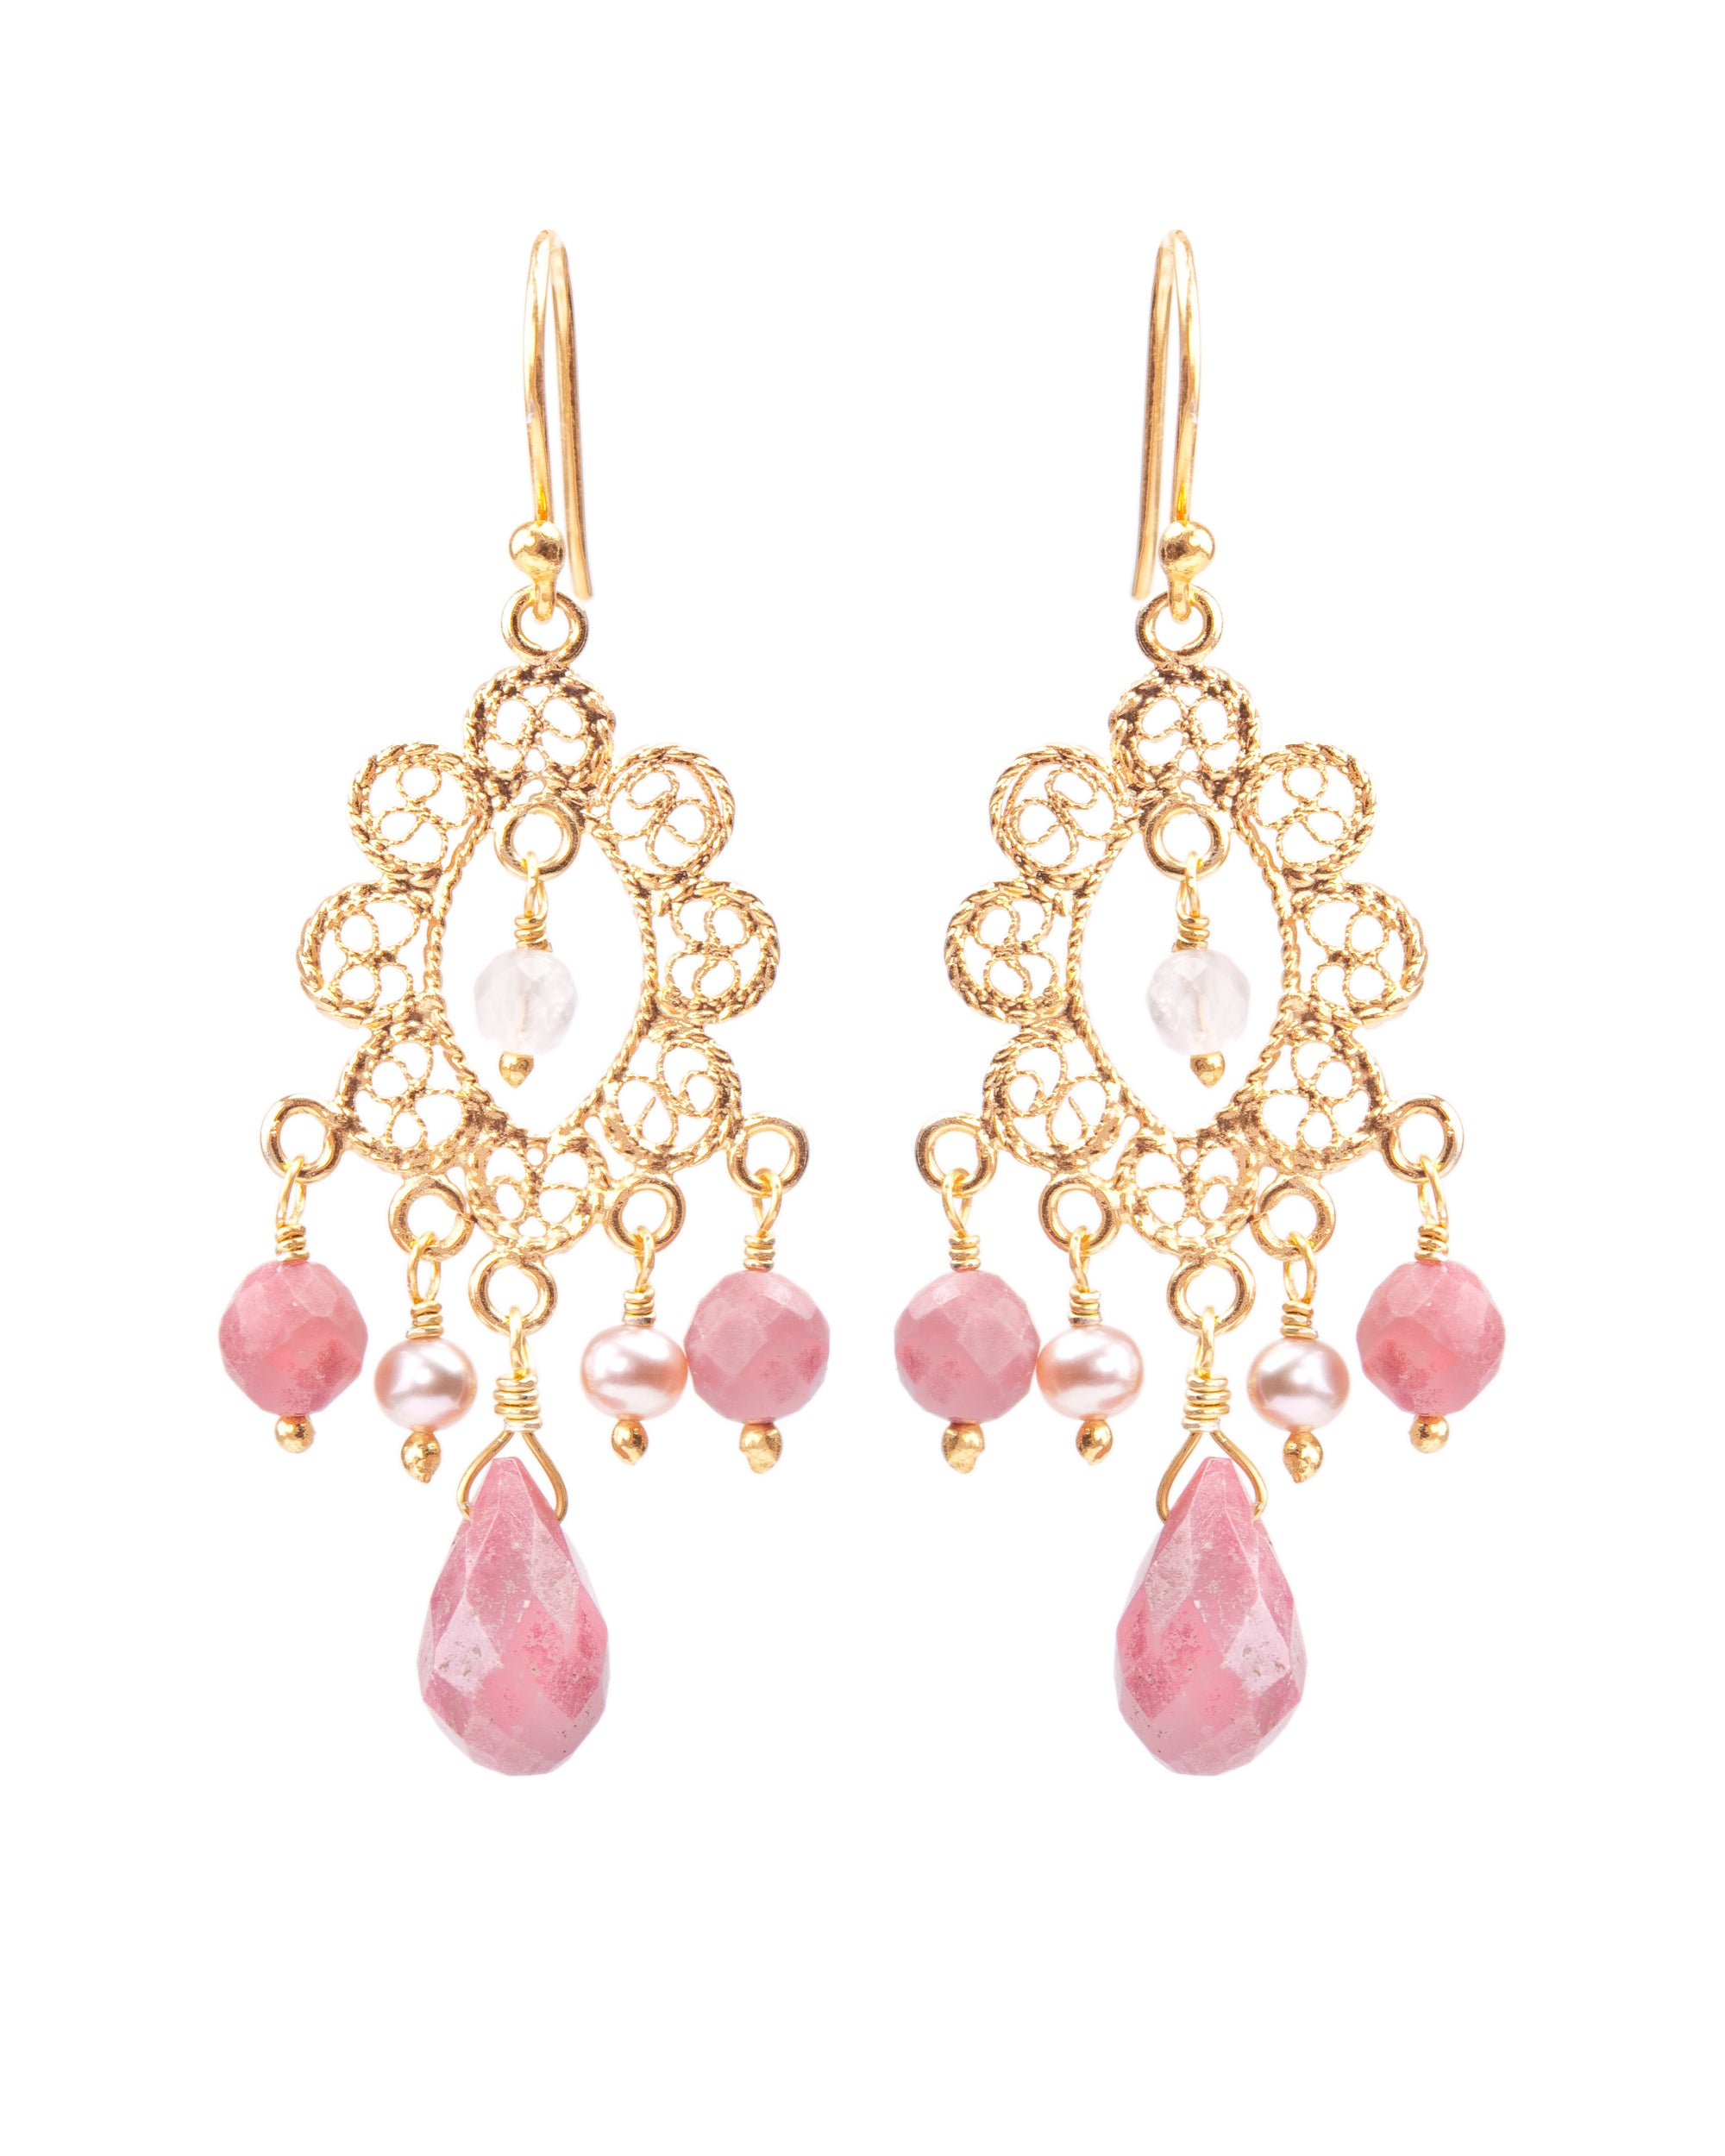 Pink Lace Earrings - with rhodolite, pink pearl, and rose quartz ✿